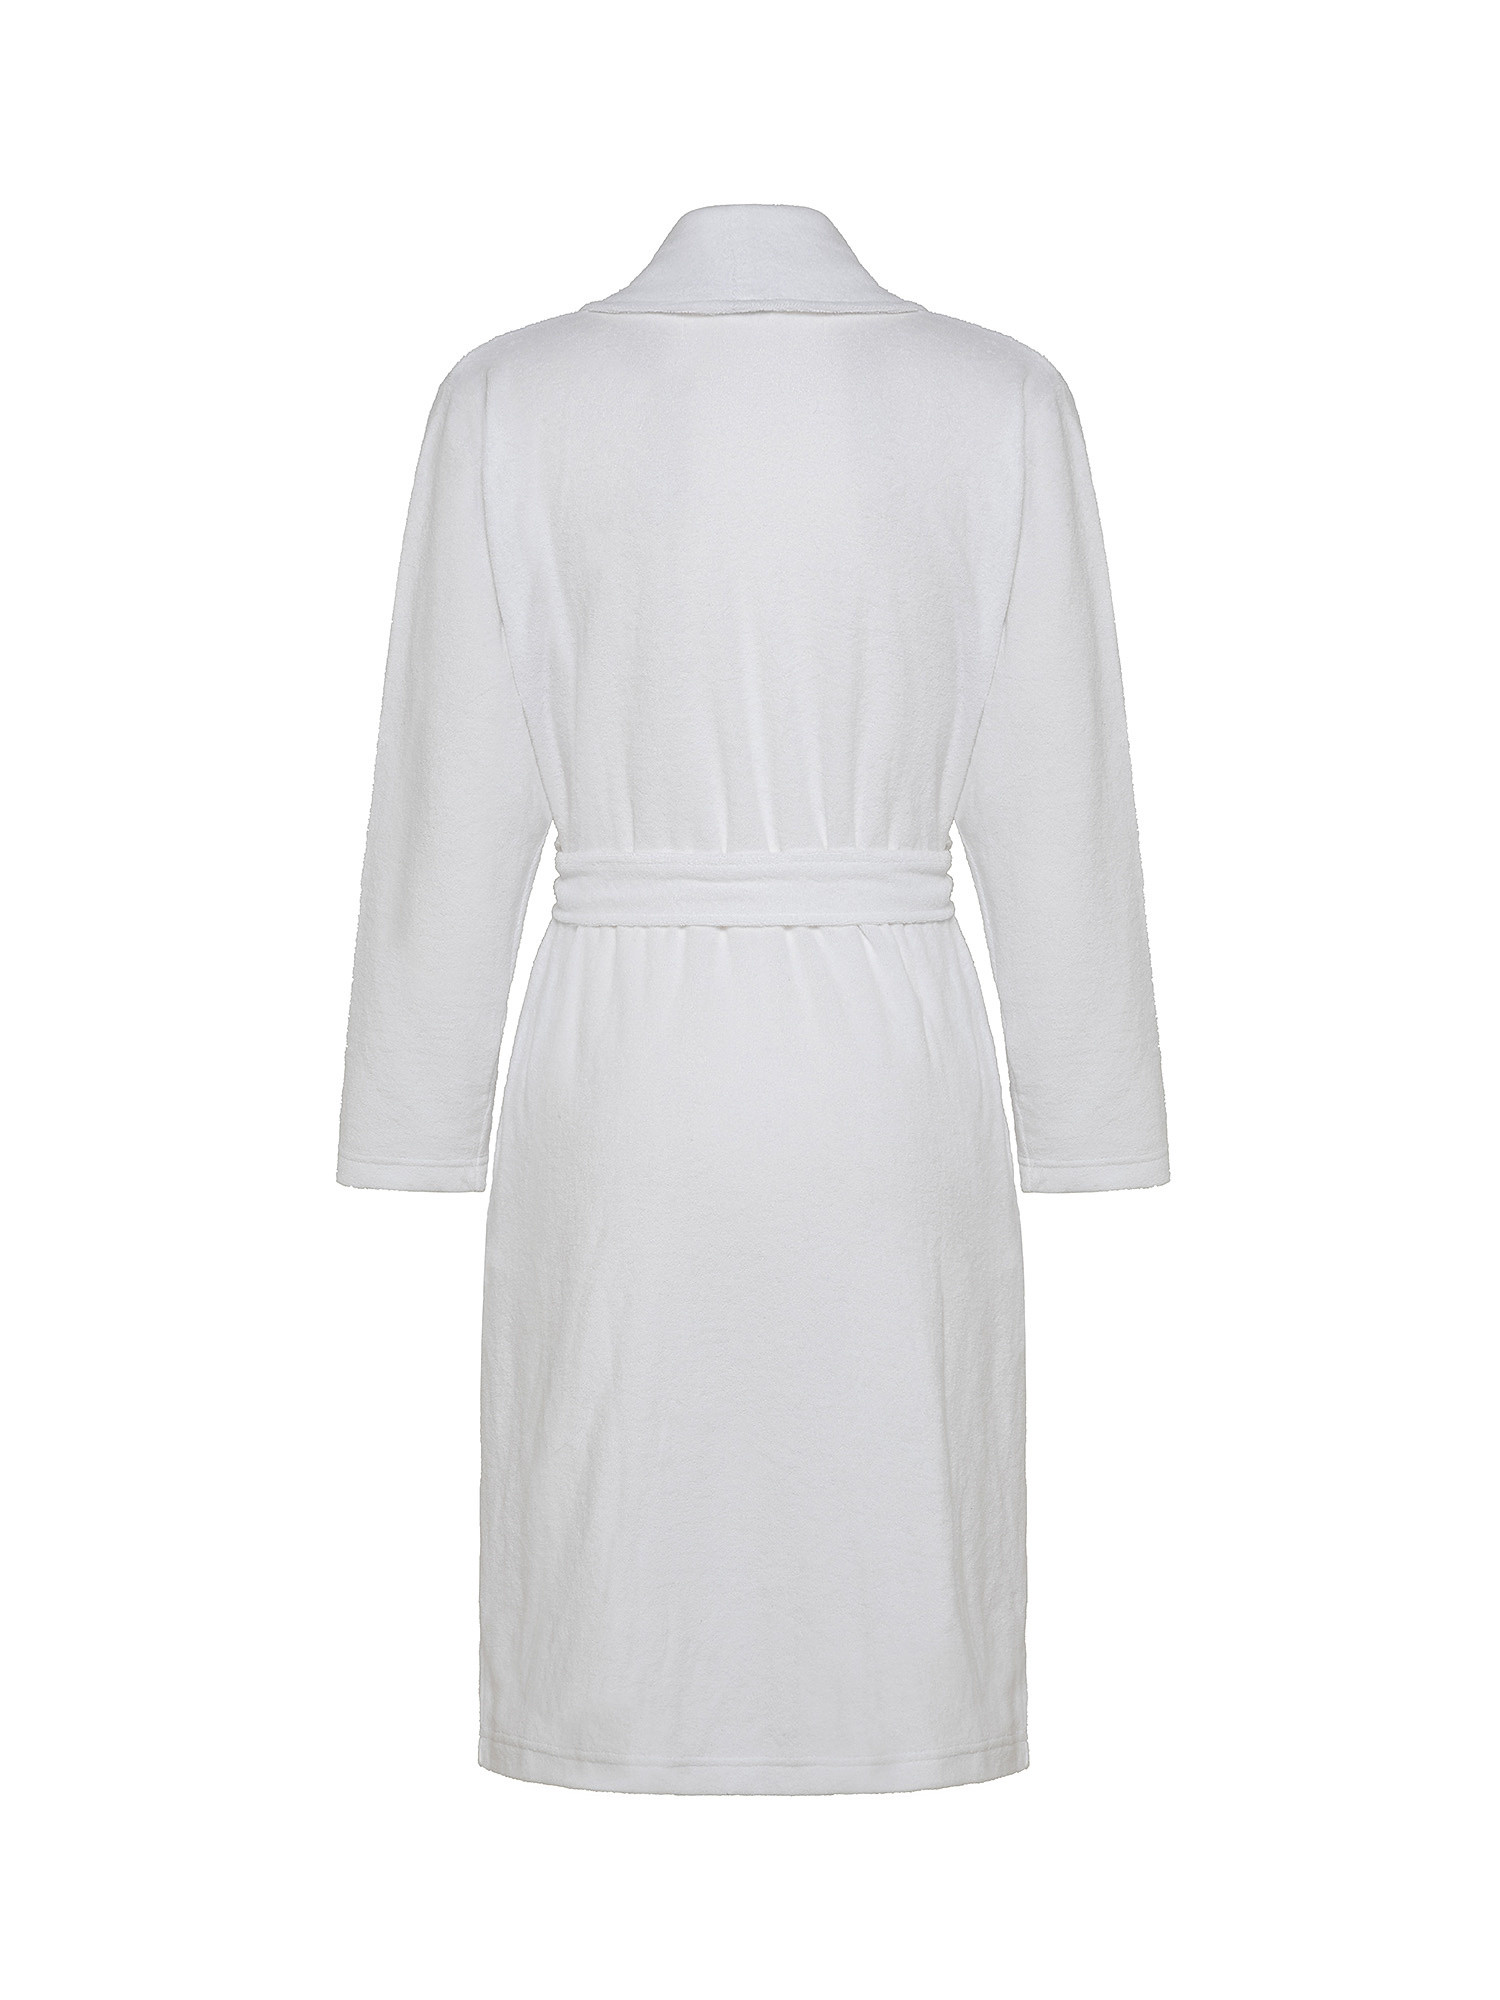 Short bathrobe in solid color micro terry, White, large image number 1